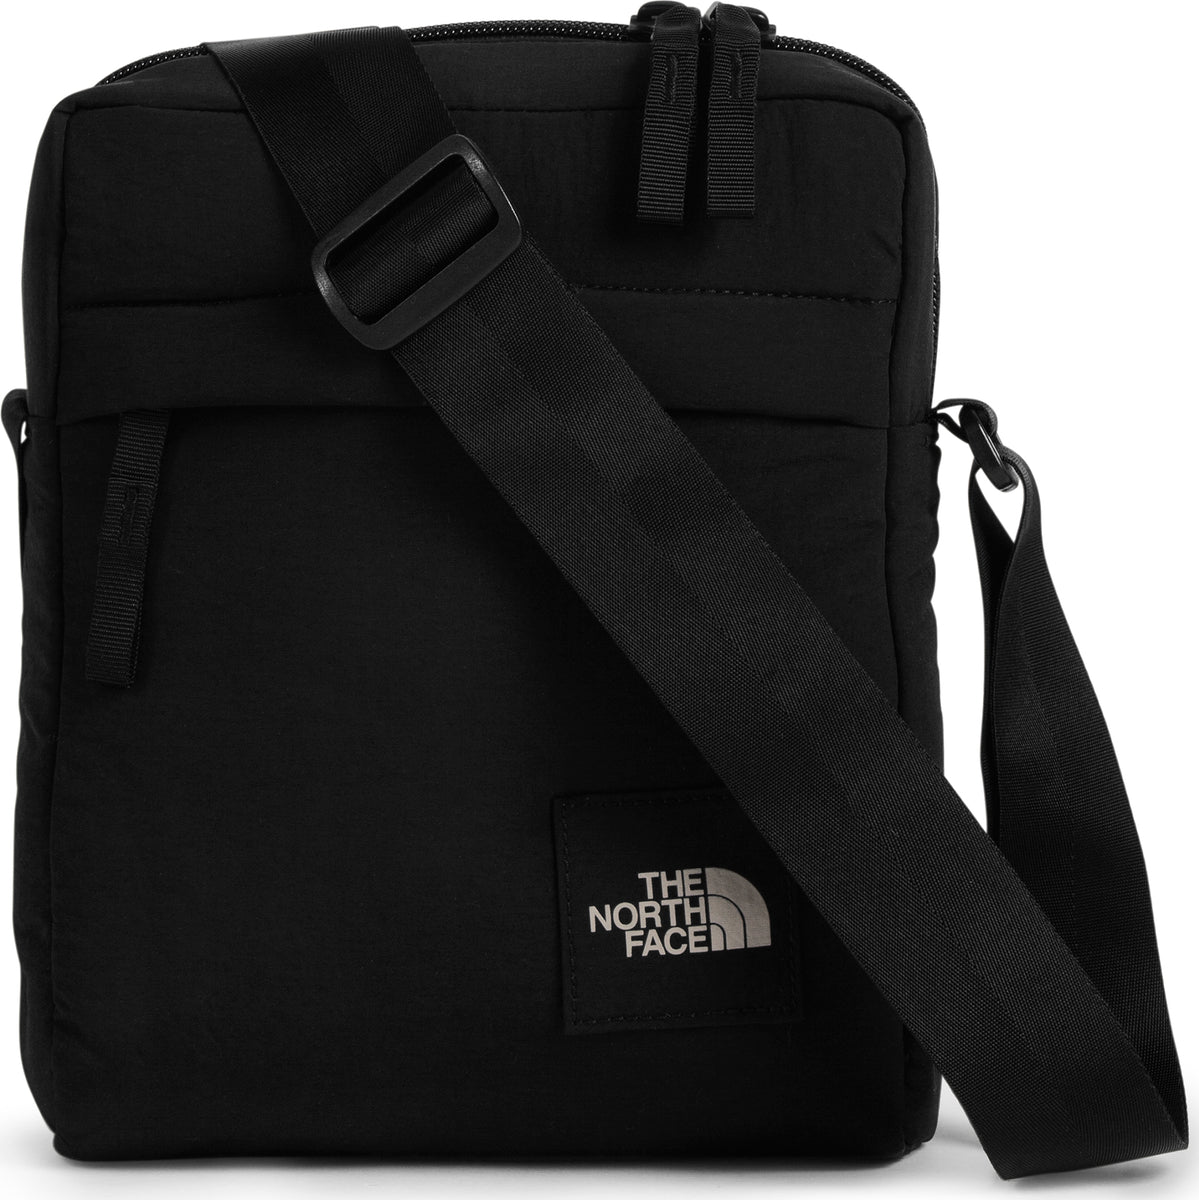 The North Face City Voyager Cross Body | Altitude Sports